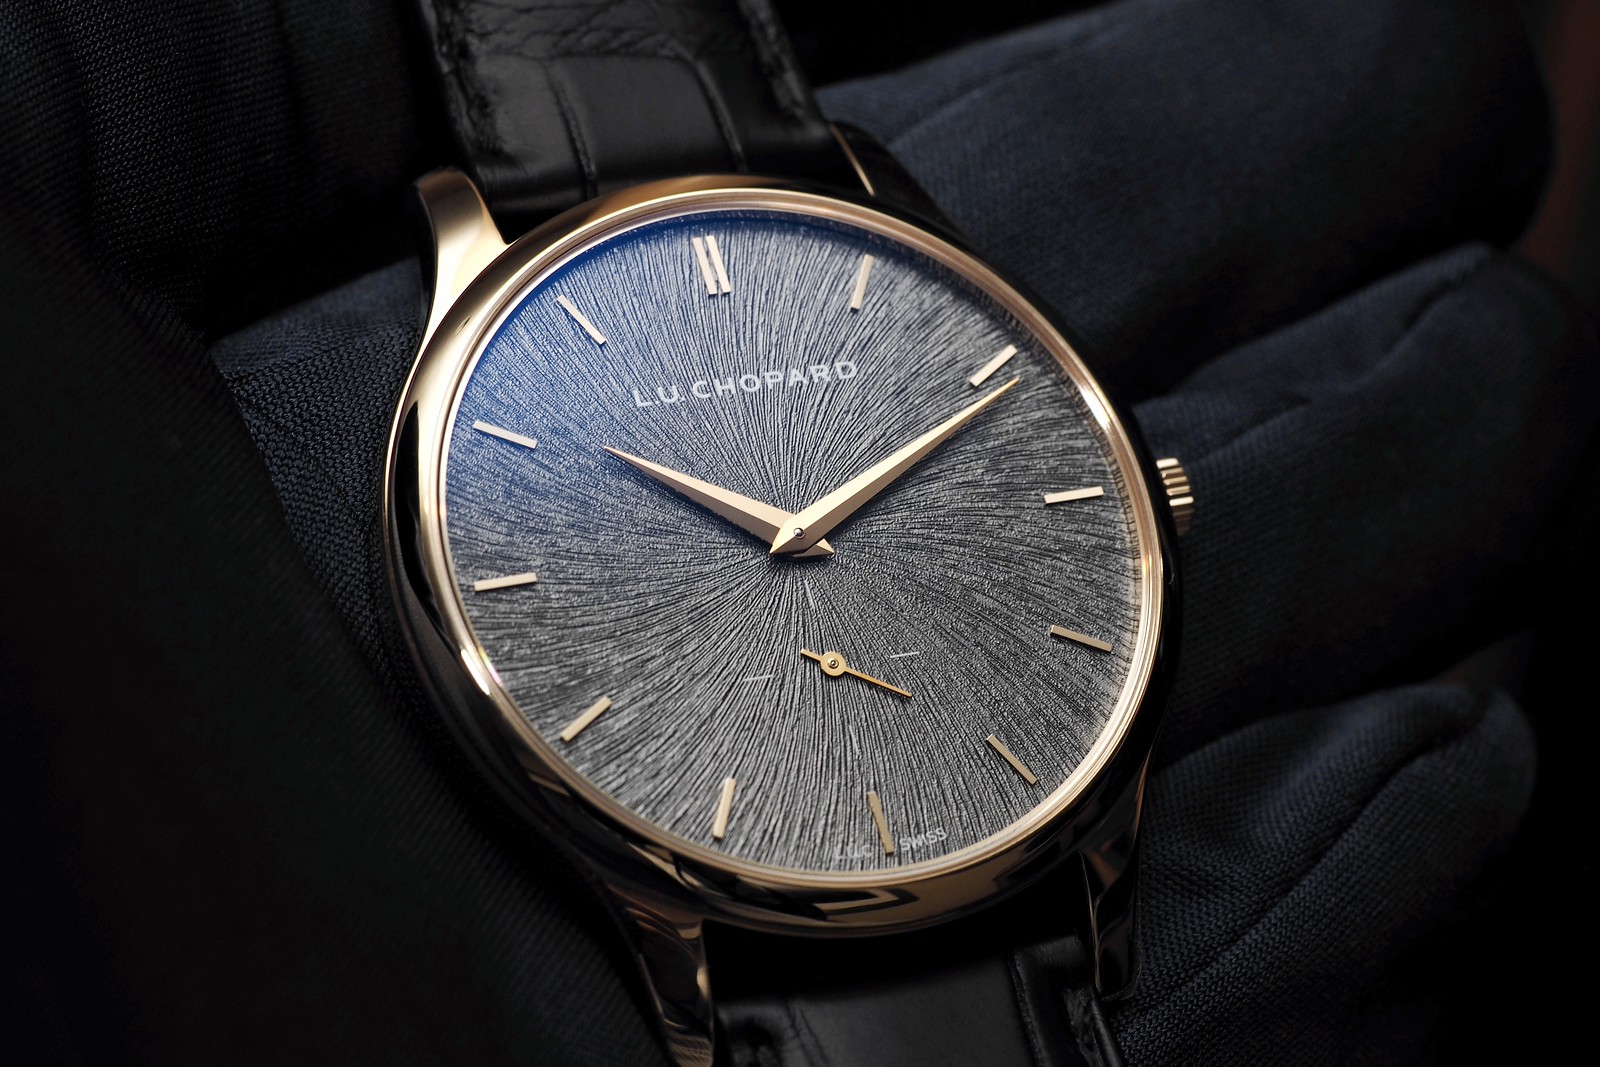 Introducing the Chopard L.U.C XPS in Fairmined Gold - Live photos